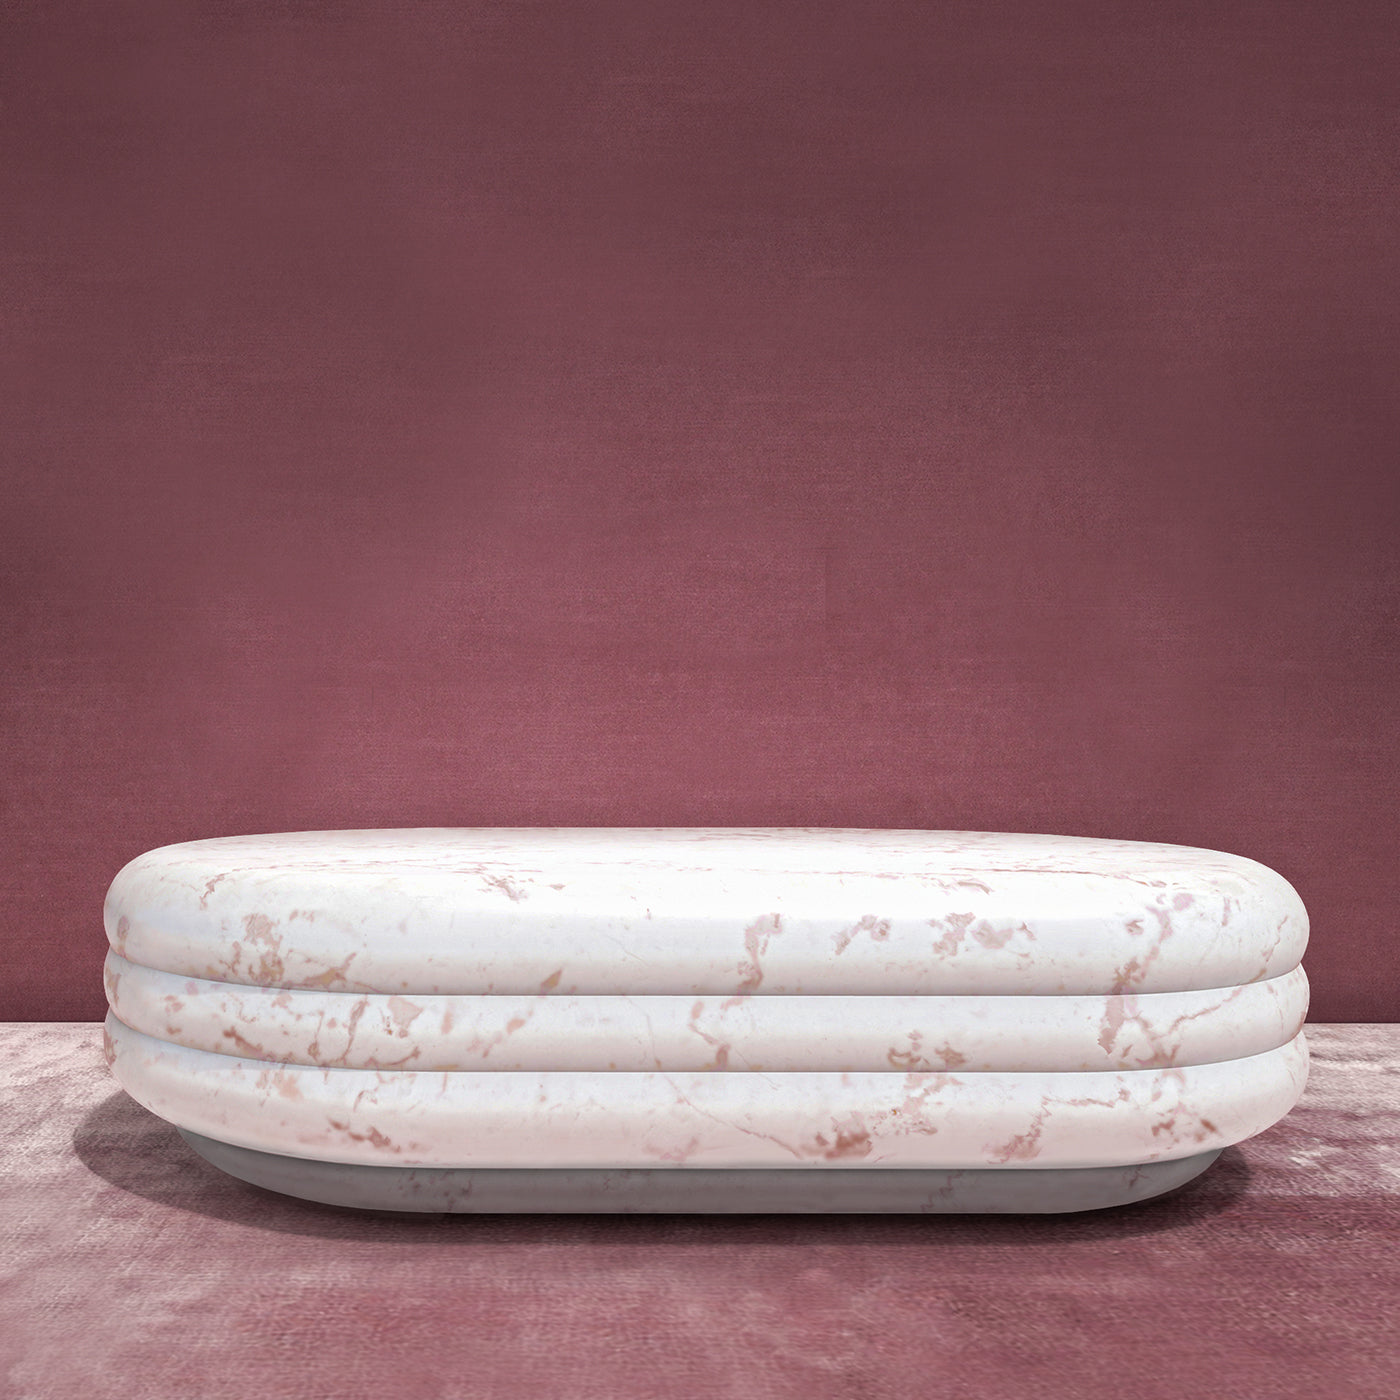 Chloe Pink Portugal Marble Coffee Table - Alternative view 1